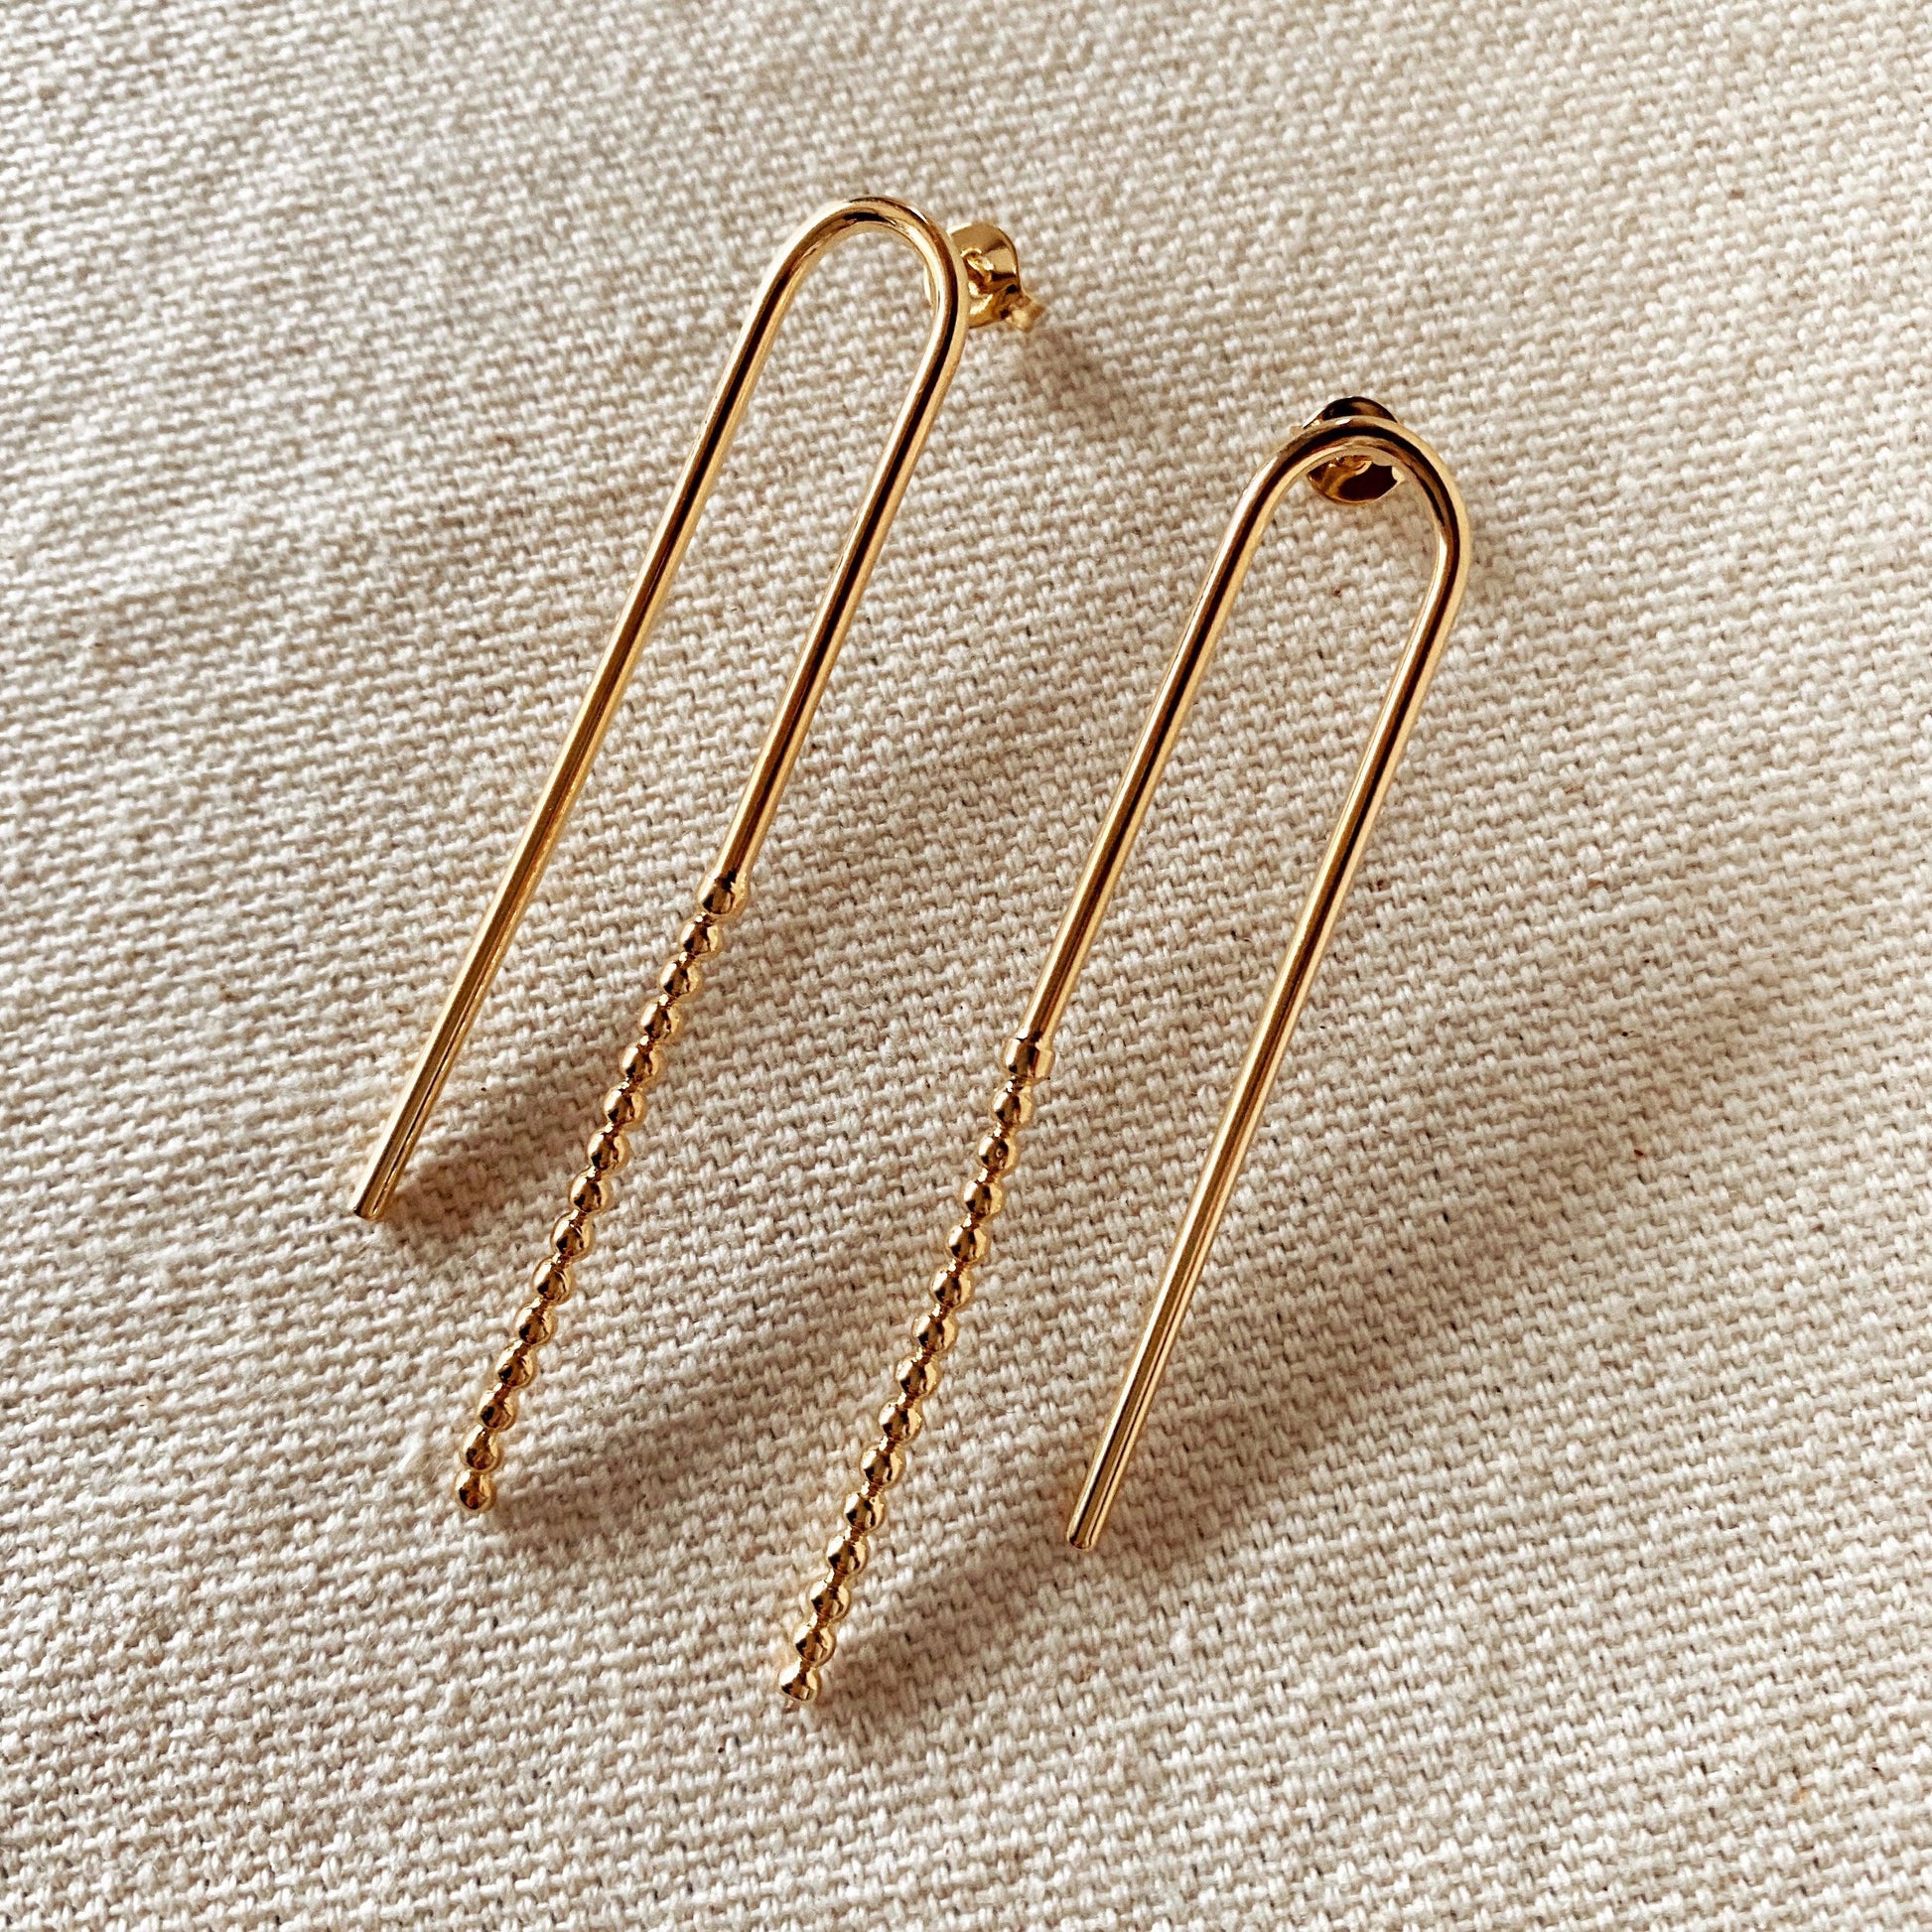 GoldFi 18k Gold Filled Shaped Drop Earrings Featuring Beaded End